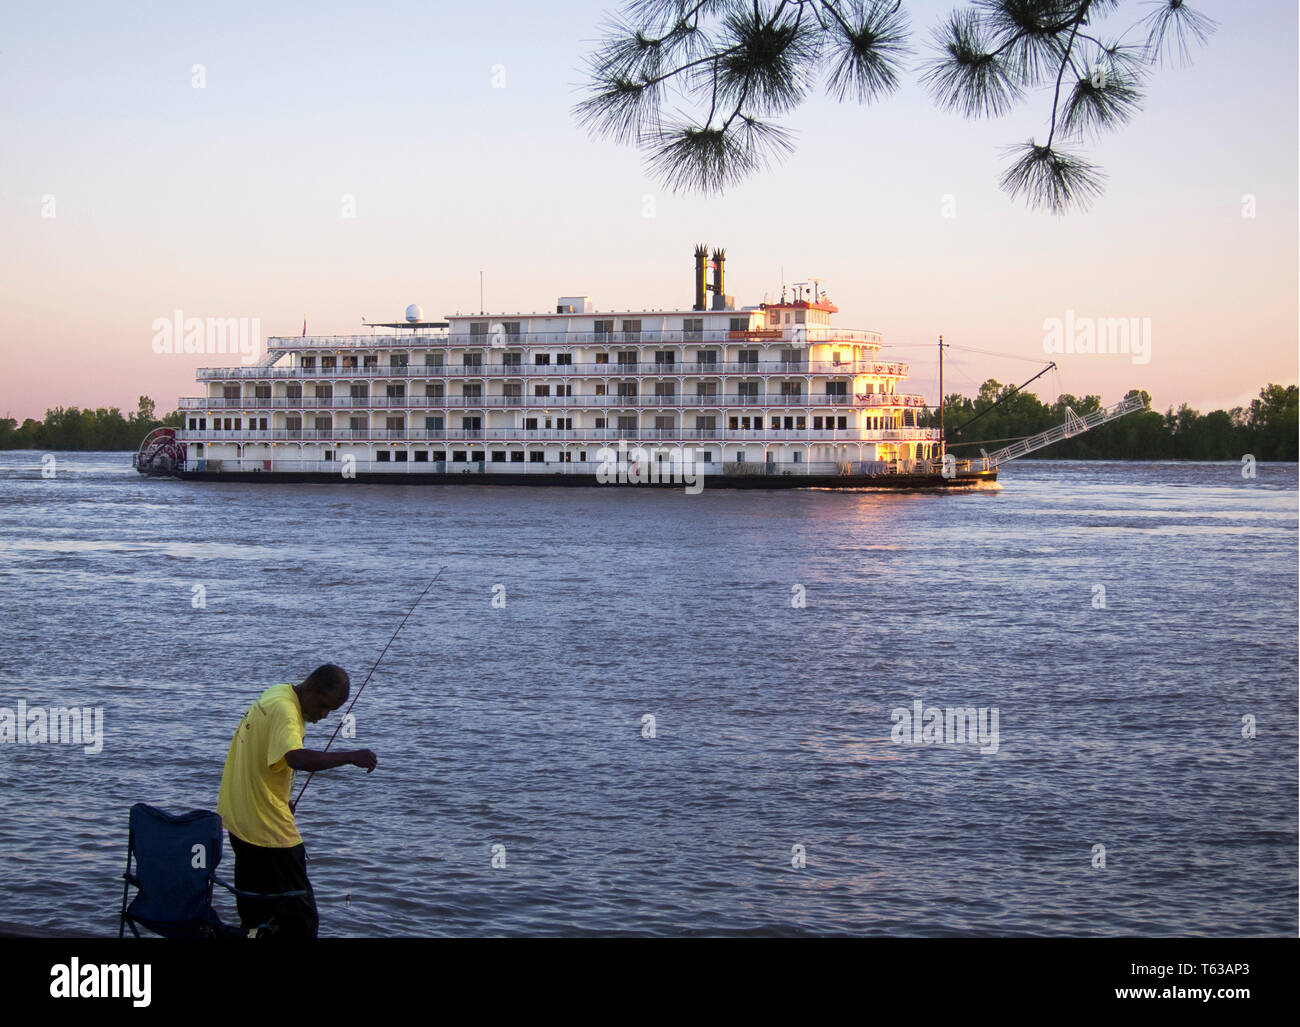 Steamboat 'Queen of the Mississippi' cruising down the Mississippi River in New Orleans, LA. Stock Photo